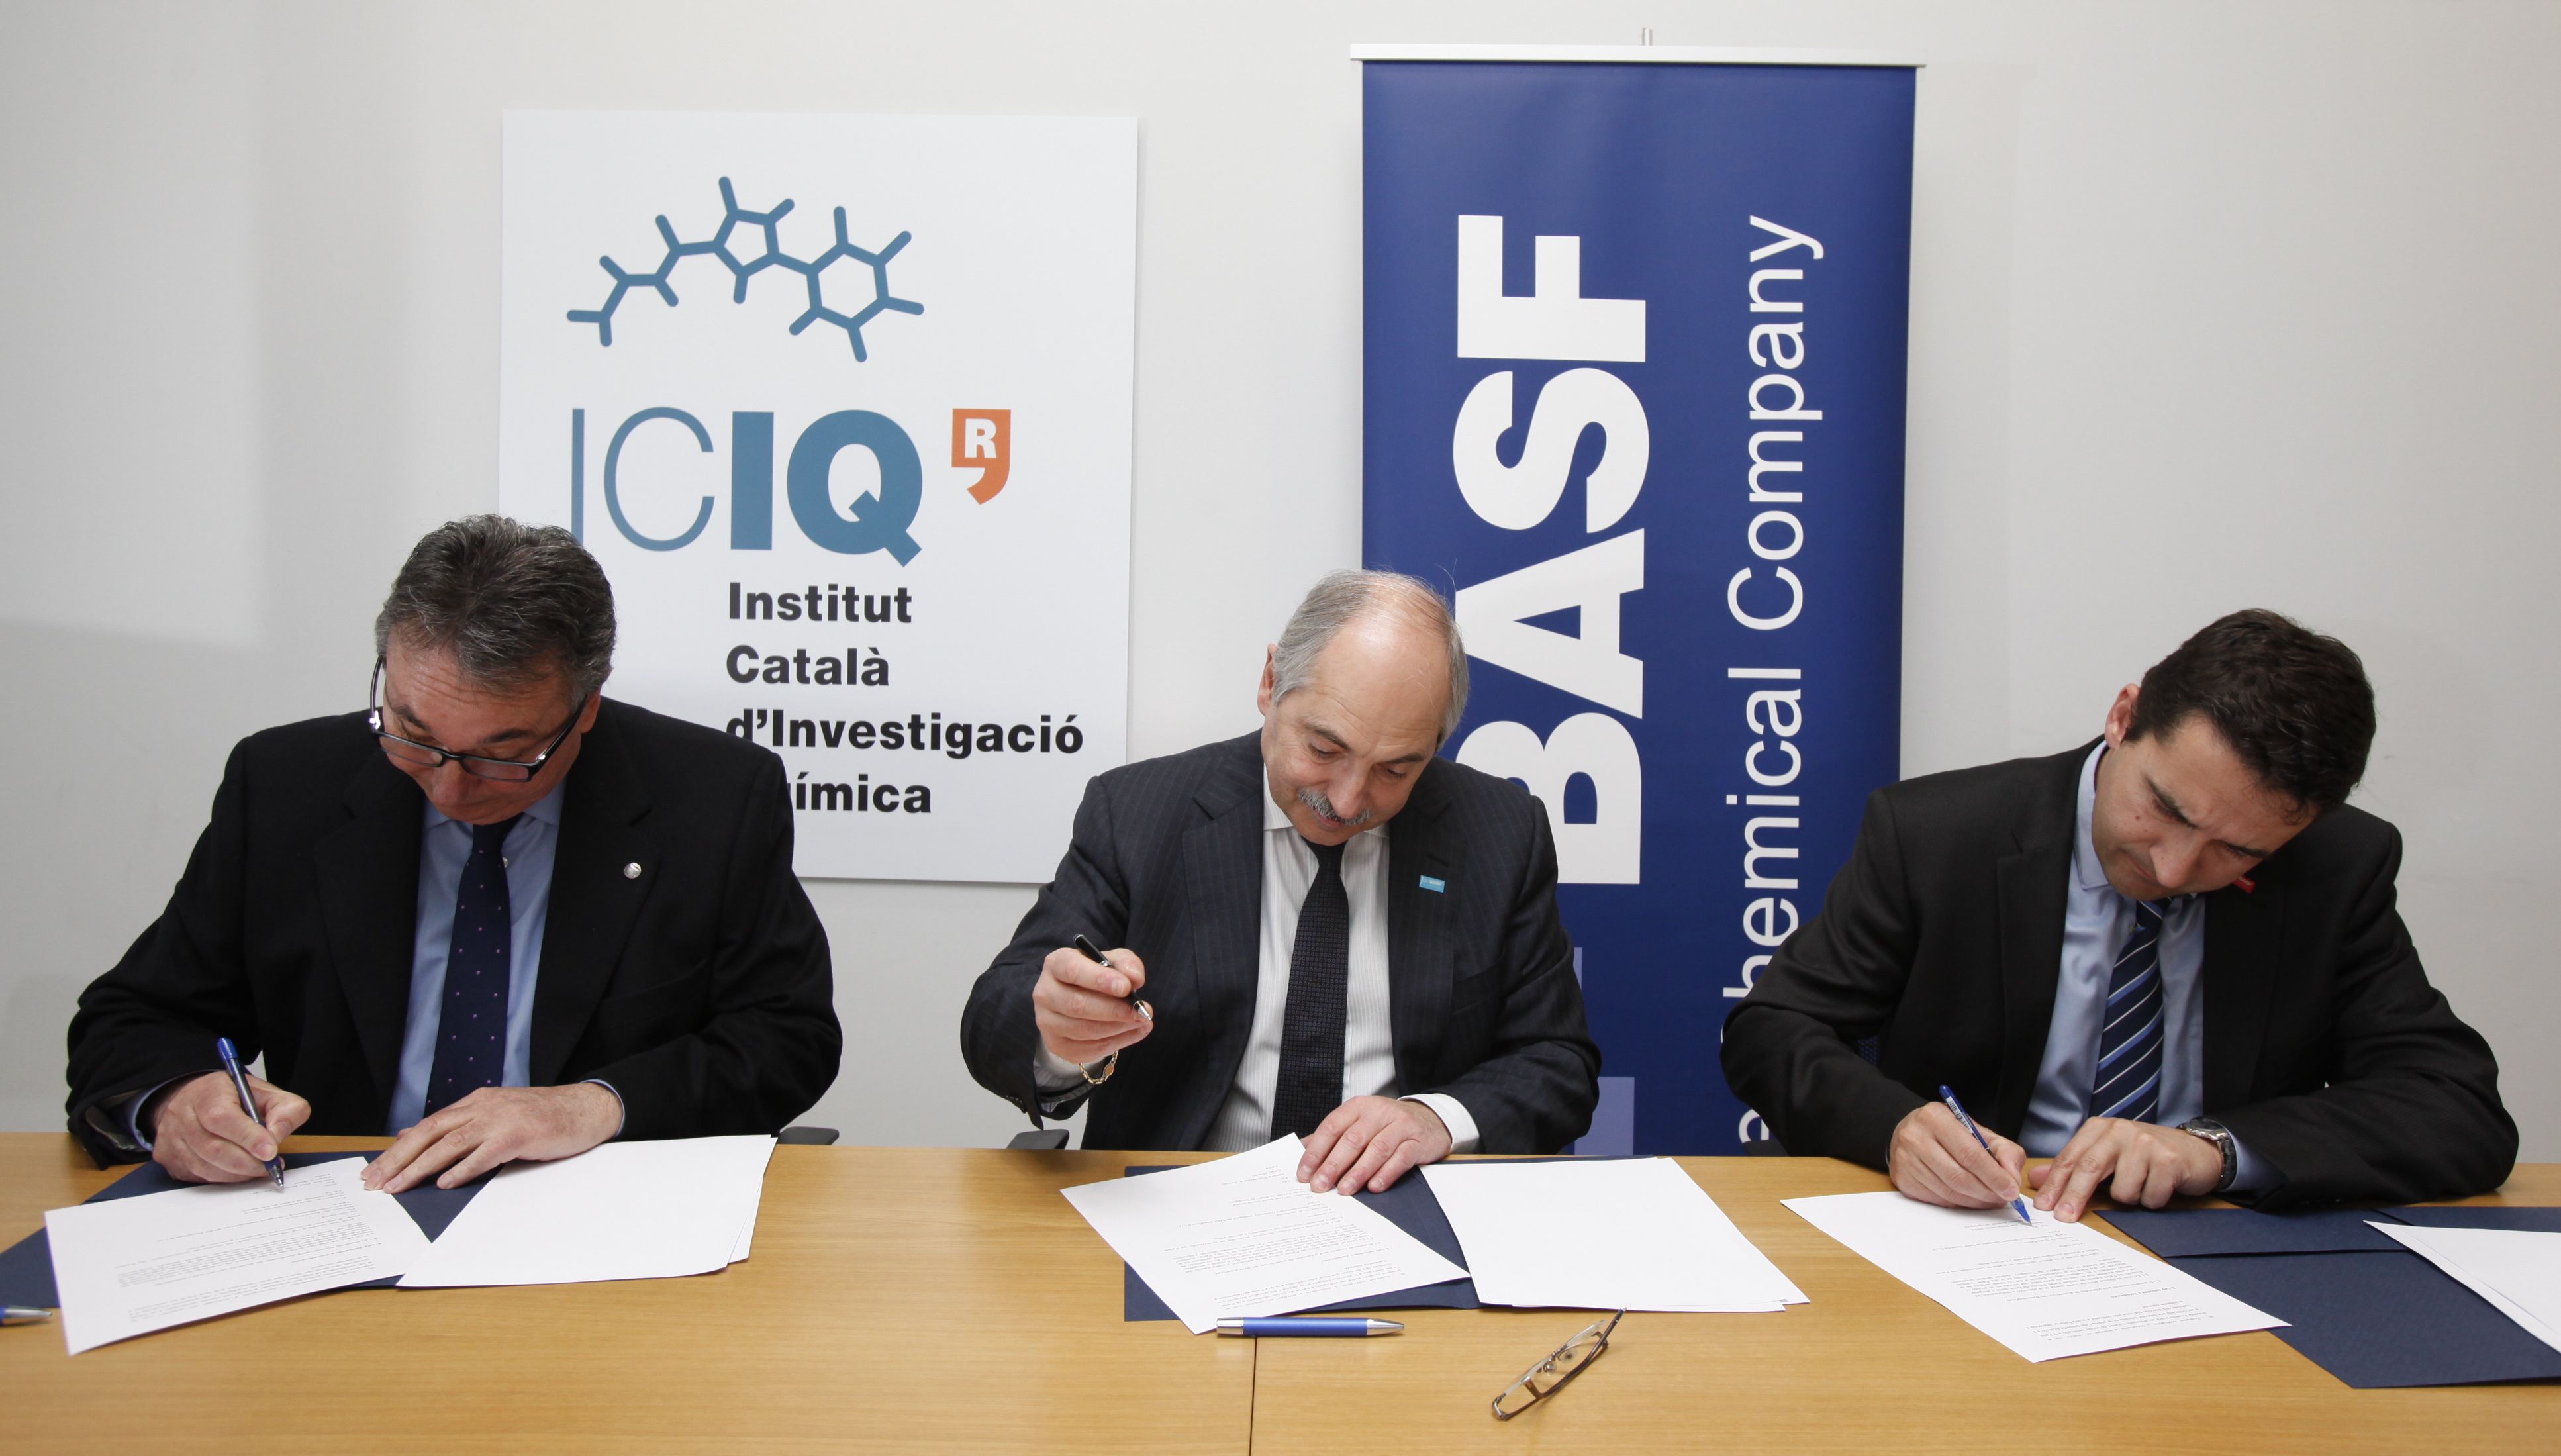 Miquel A. Pericàs, Erwin Rauhe and Joan Maria Garcia Girona signing the agreement